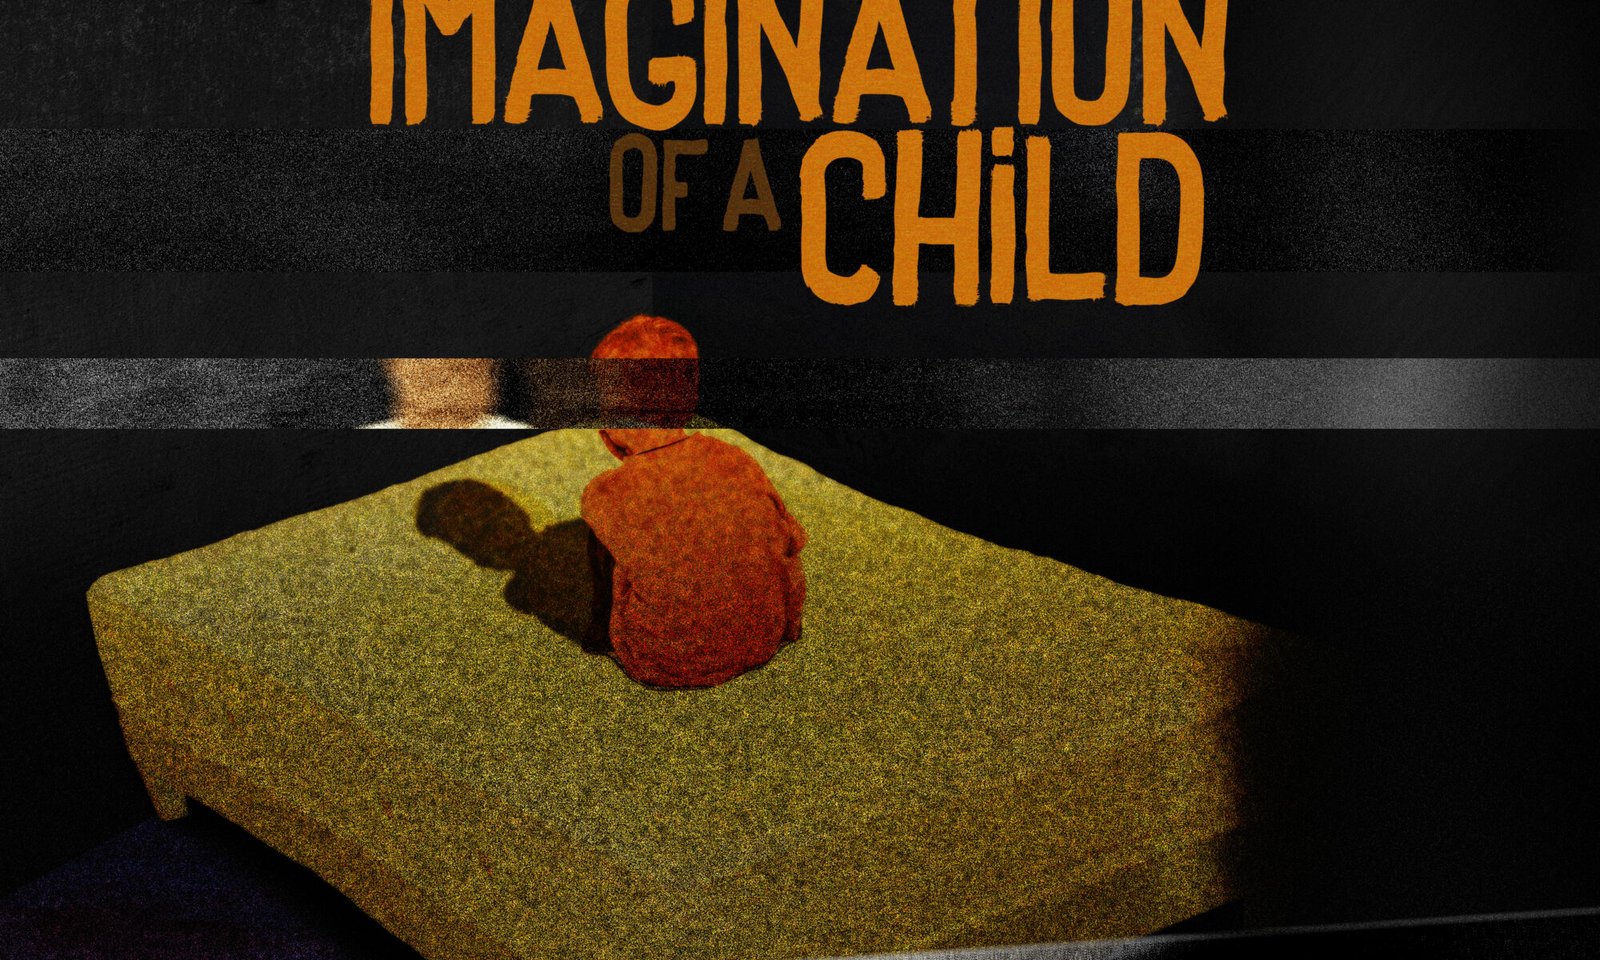 A child sits on a bed, facing away. A dark fog appears on the right. A VHS-like distortion is impacting the picture. The title is displayed: The Imagination of a Child.